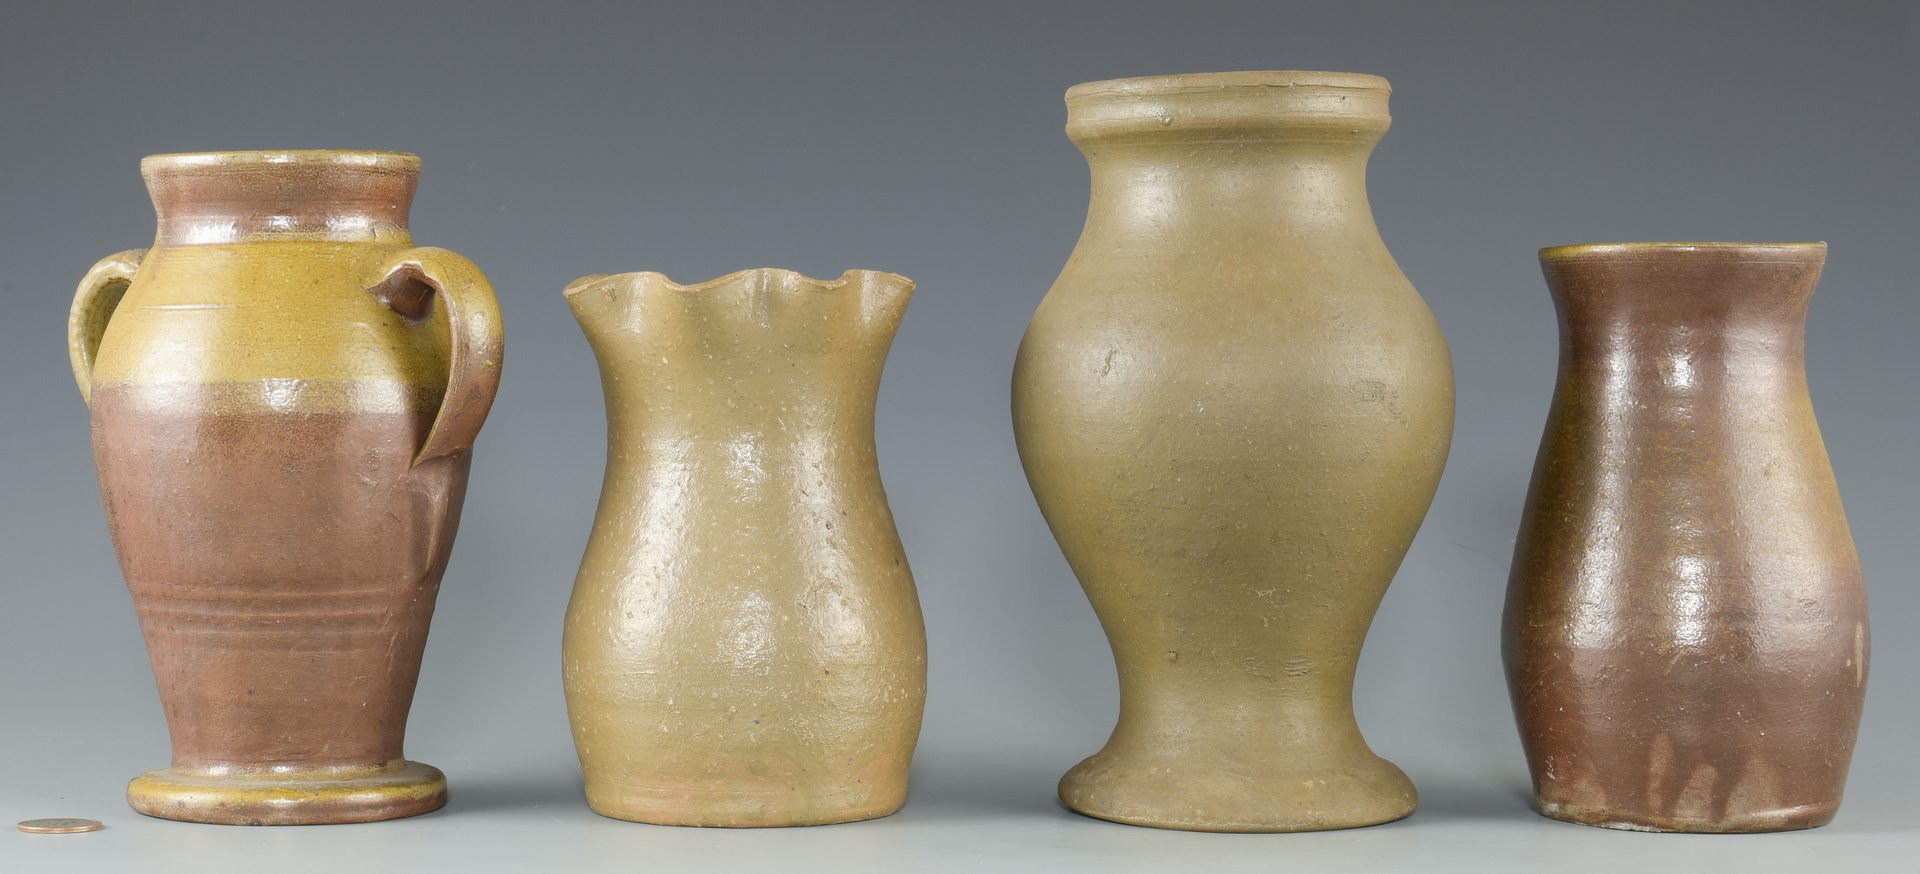 Lot 122: 4 Middle TN Stoneware Jars and Vases